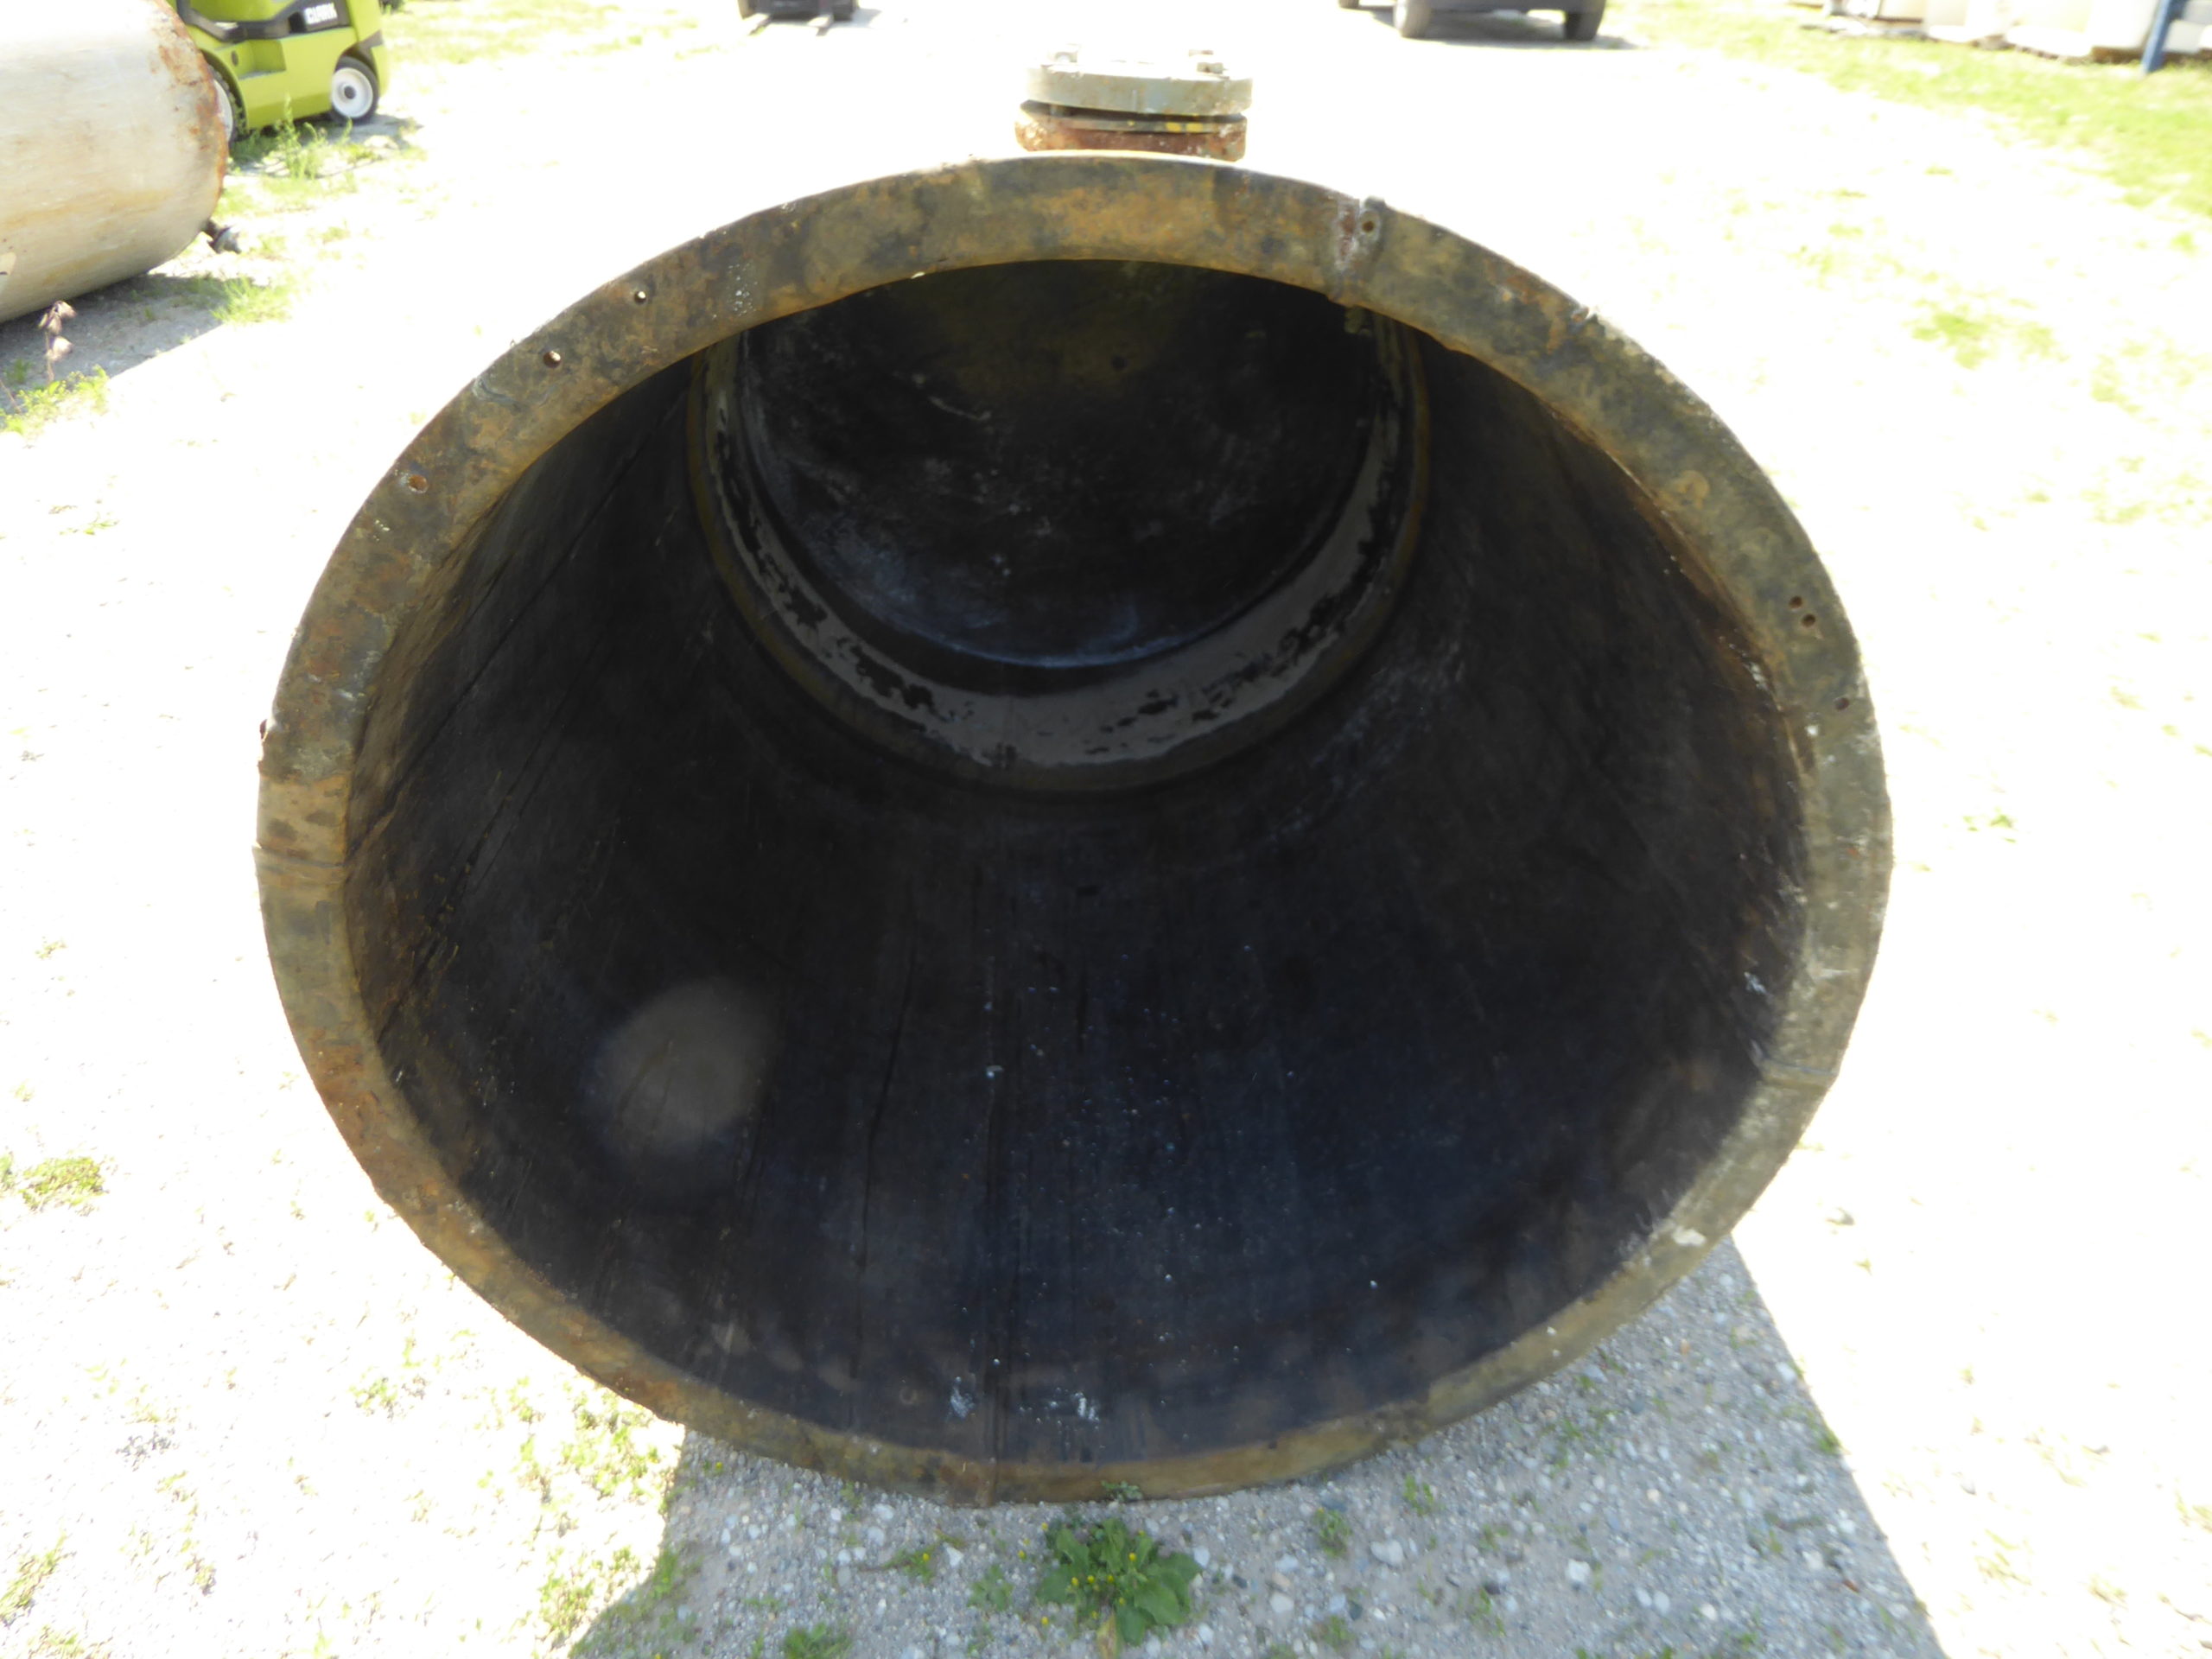 Used Cylindrical Tank - 300 Gallon Steel Cylindrical Tank CT2308-Tanks-Cylindrical